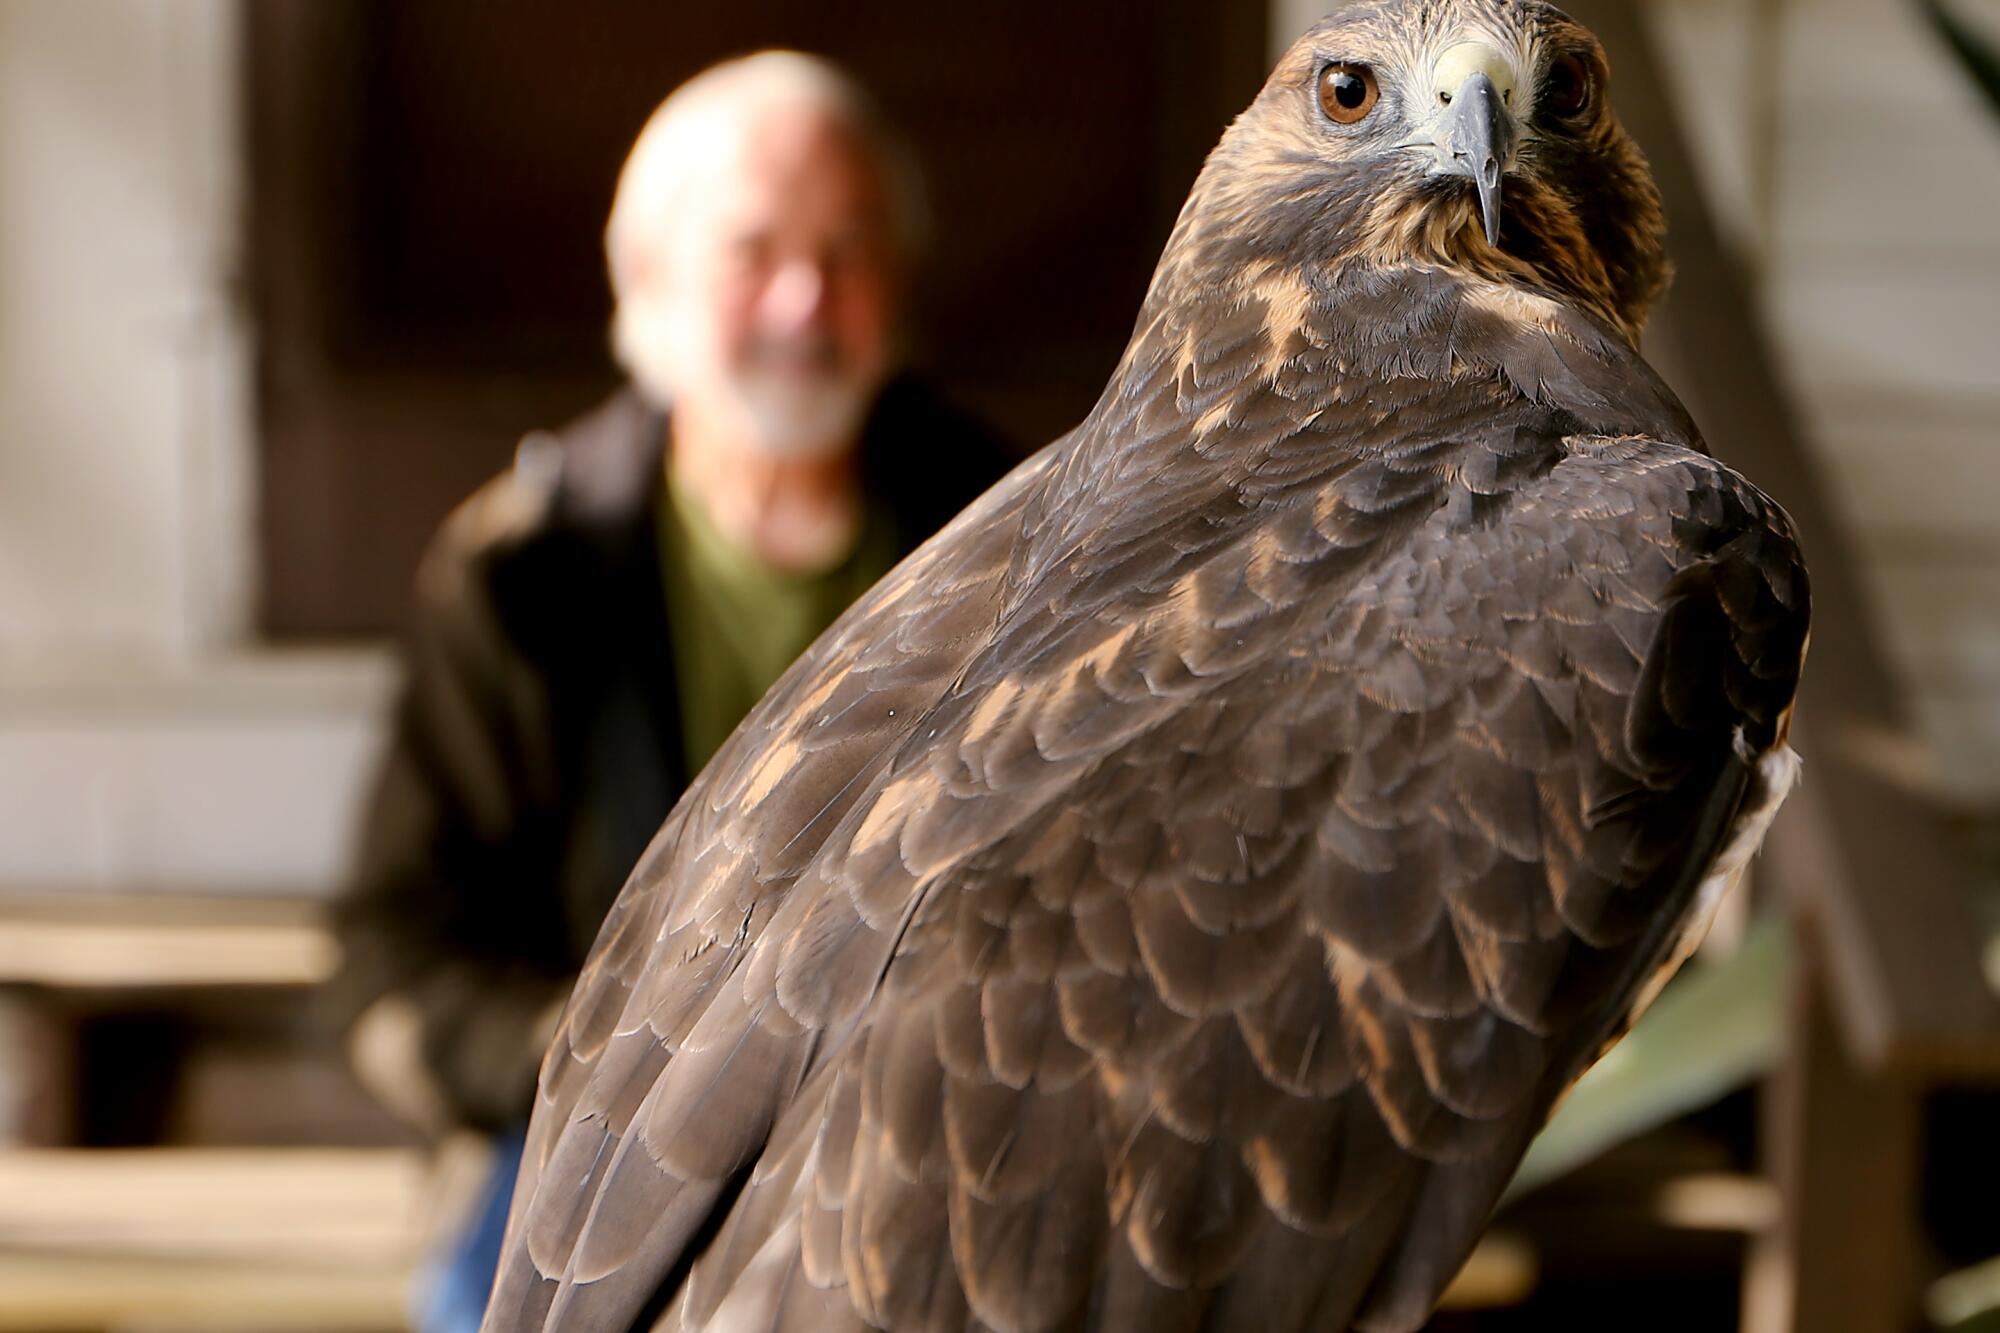 A man stands in the background looking at a raptor on a perch in the foreground